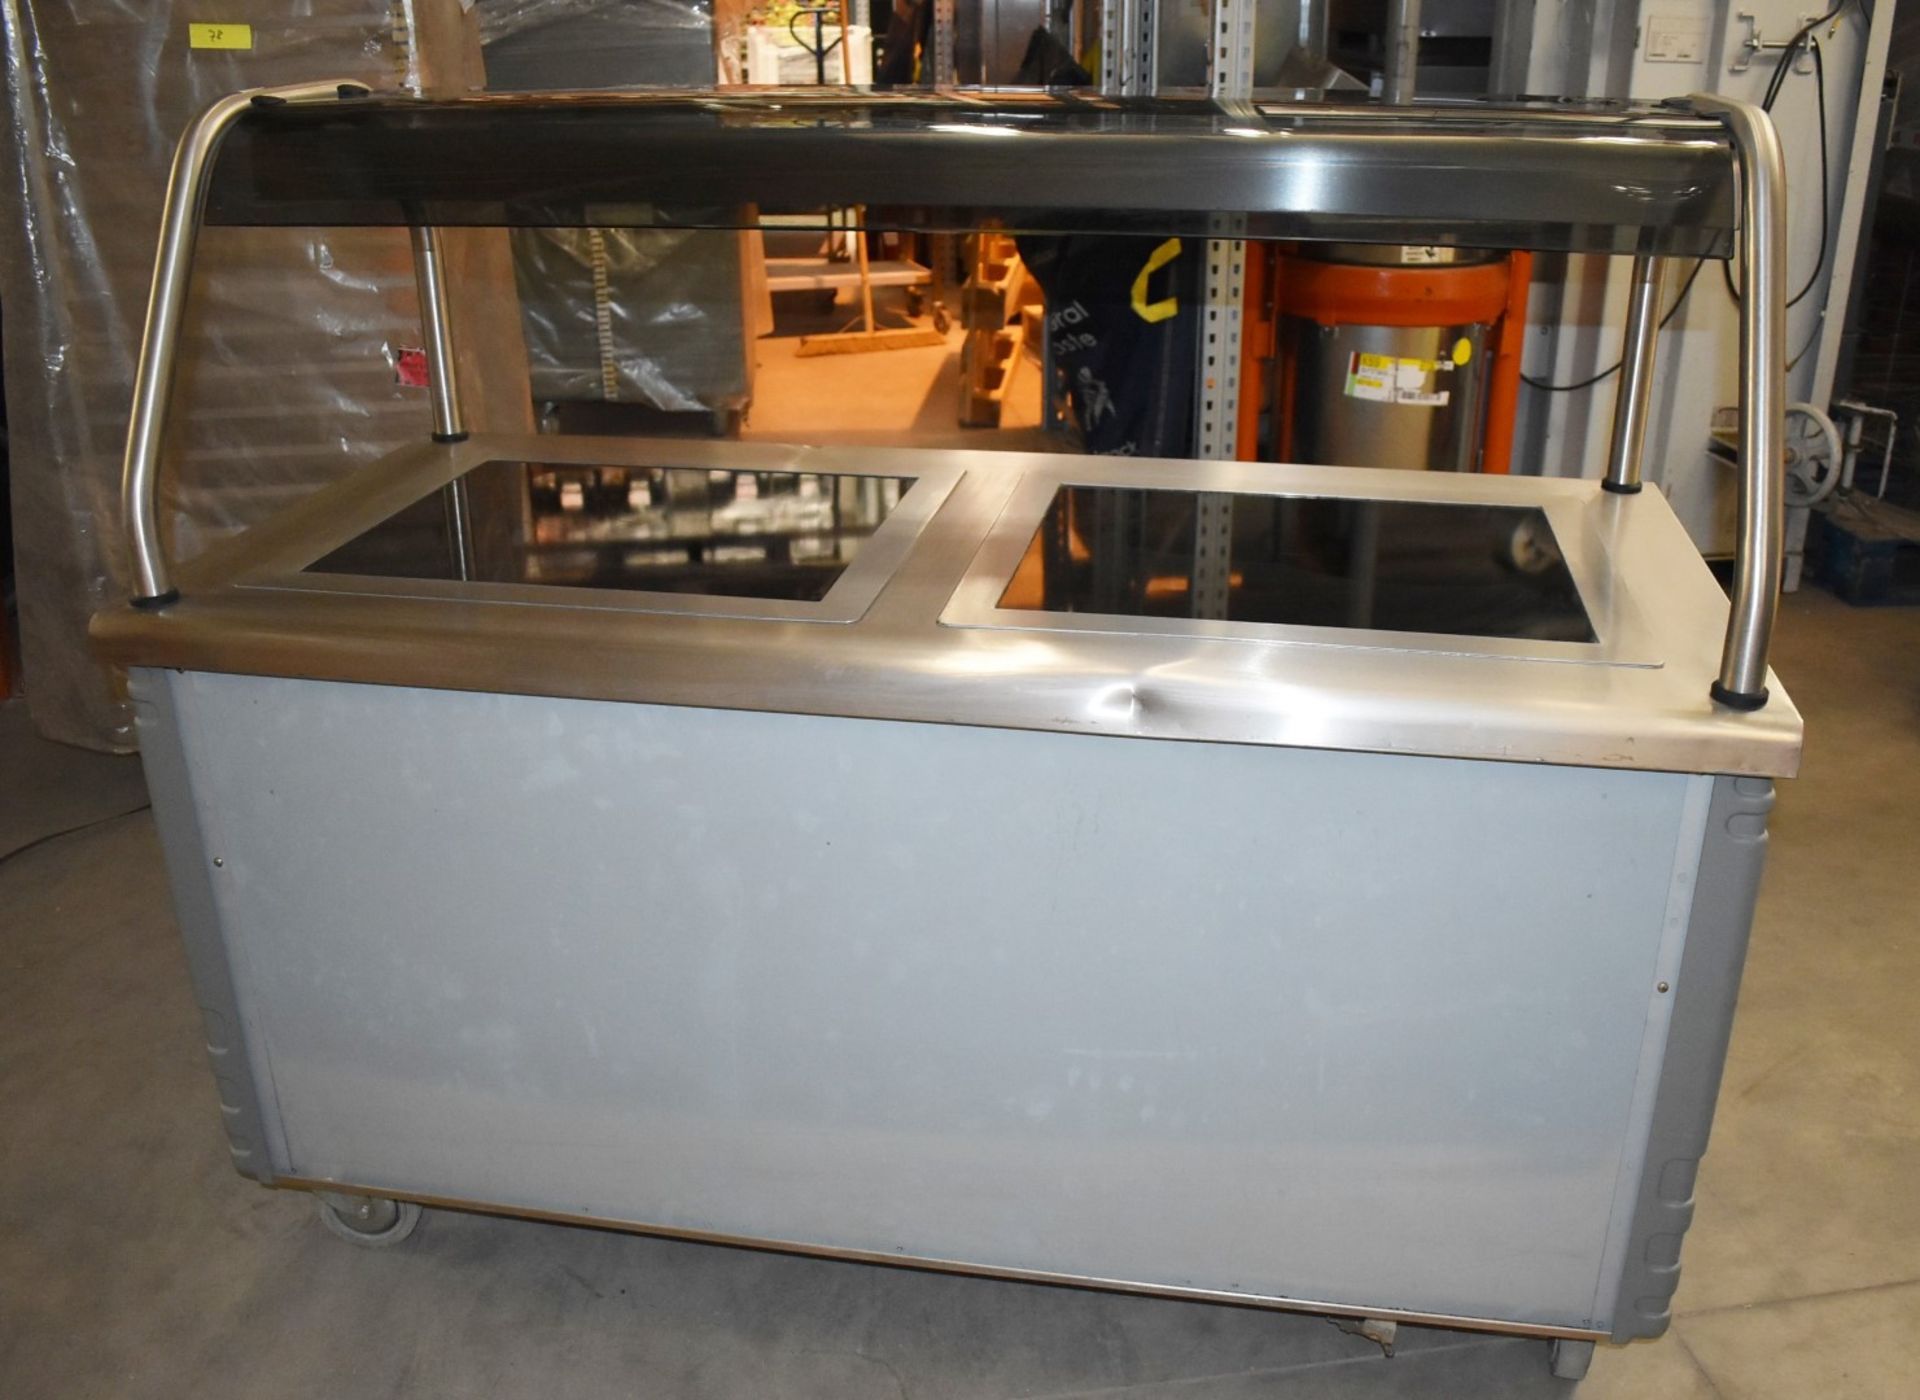 1 x Grundy Commercial Carvery Unit With Twin Hot Plates, Overhead Warmer and Plate Warming Cabinet - Image 5 of 21